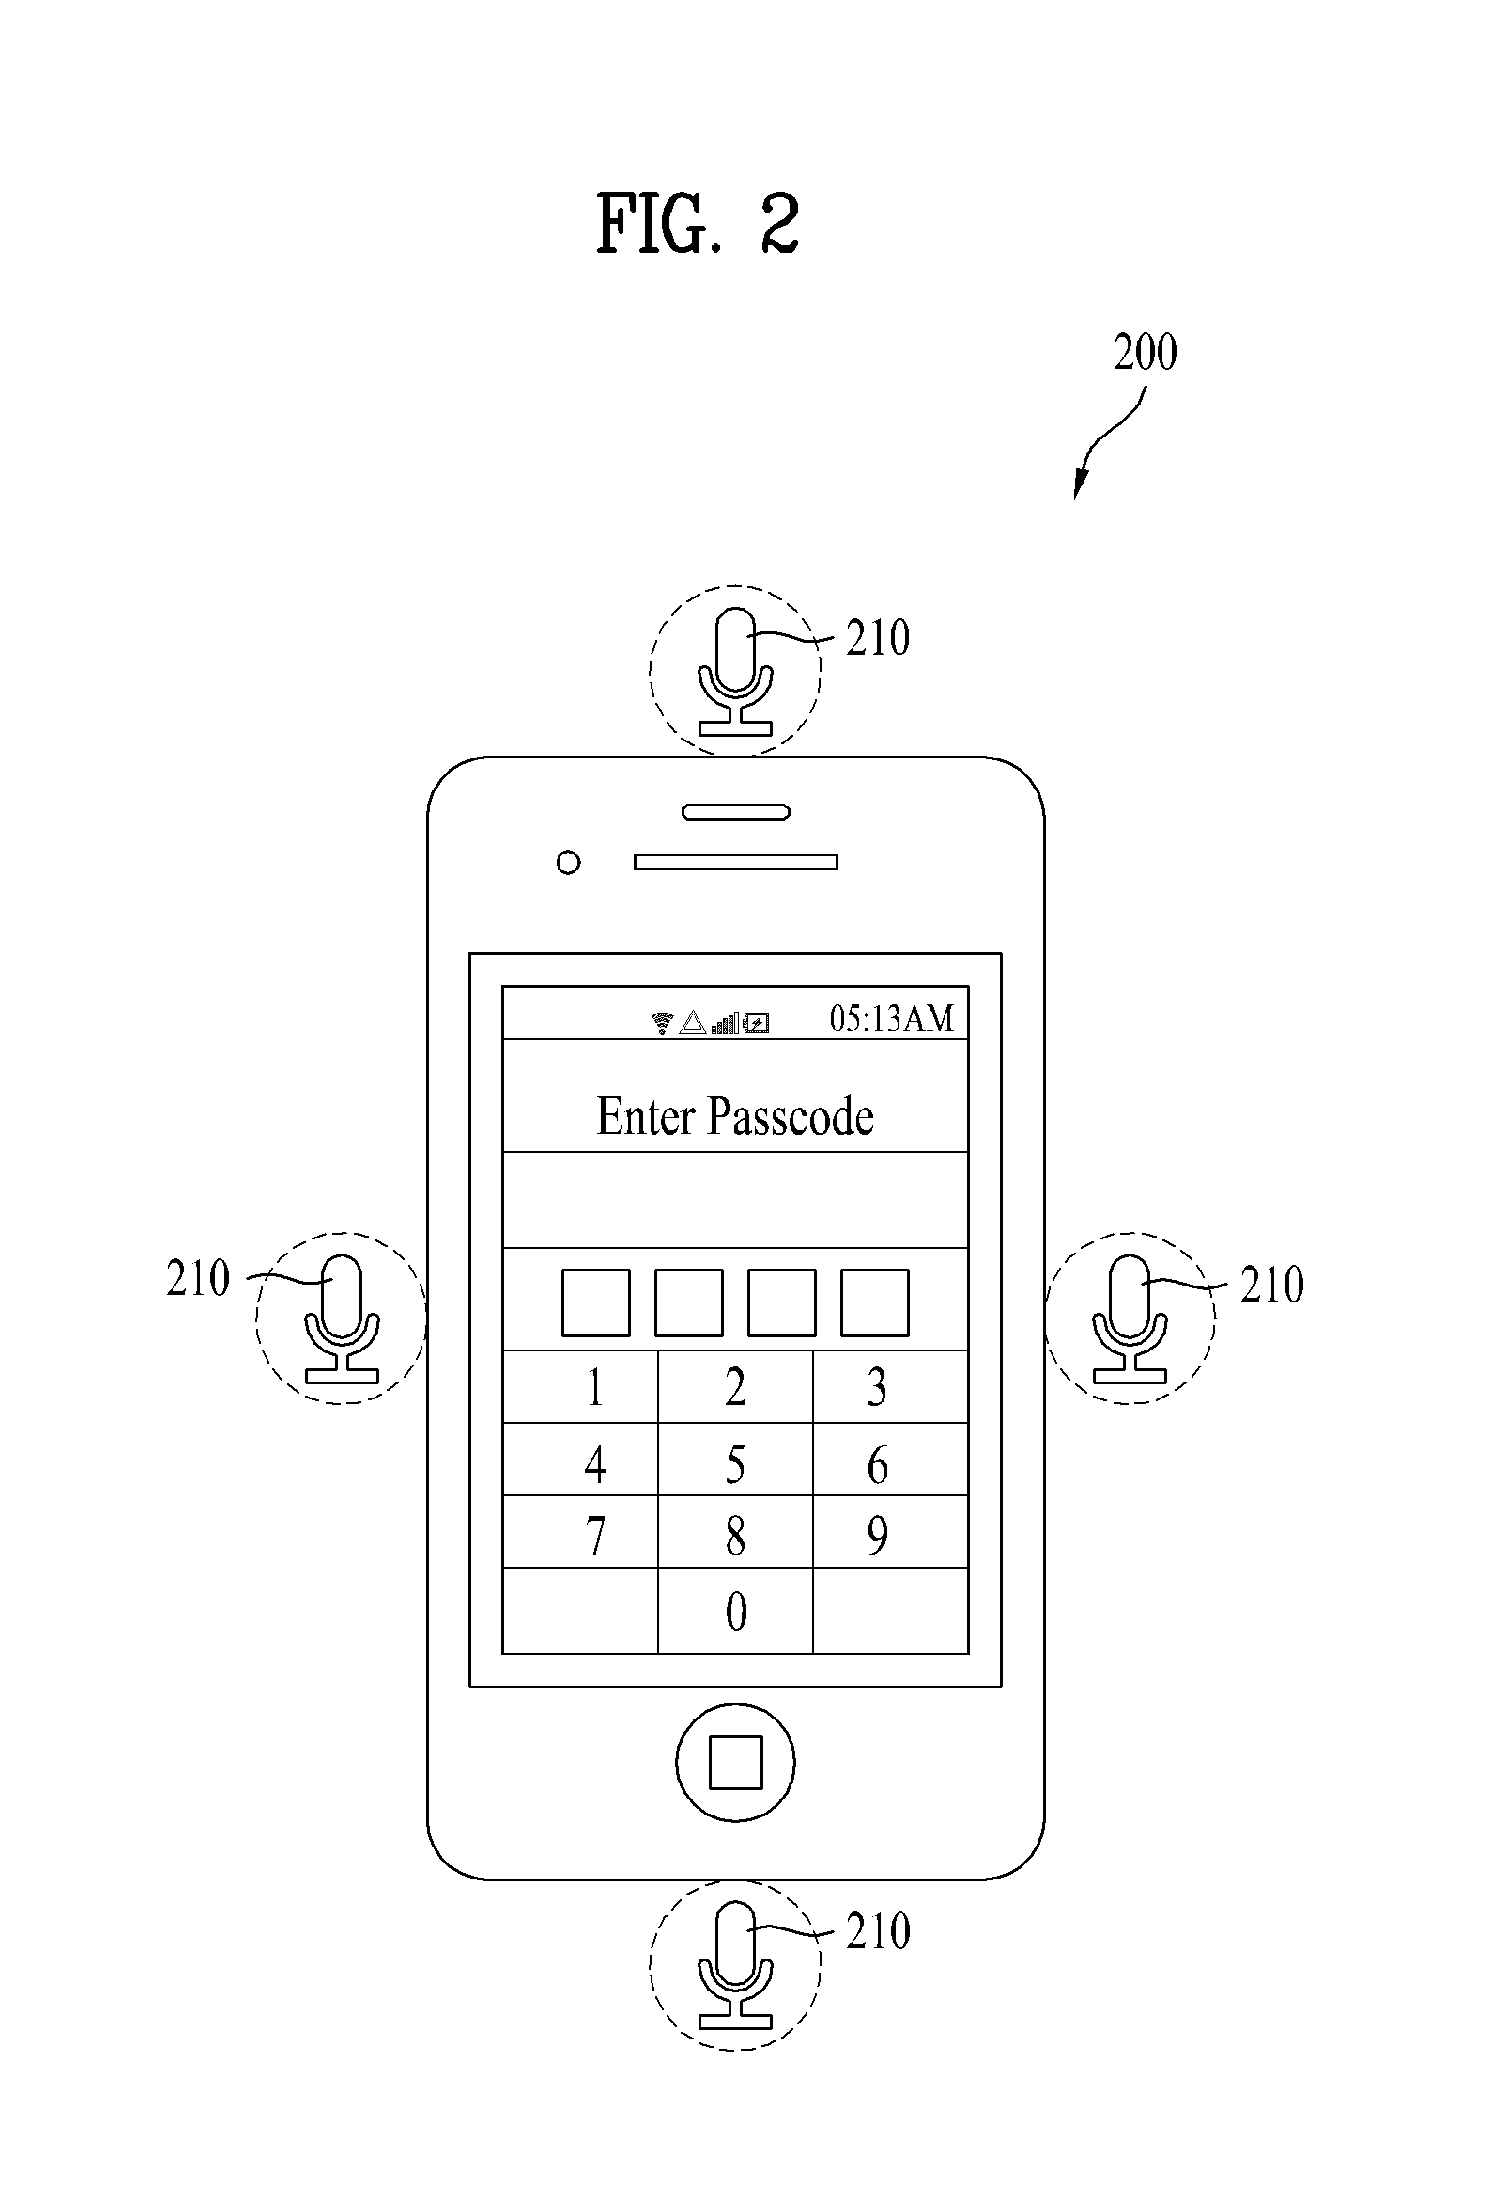 Mobile device having at least one microphone sensor and method for controlling the same